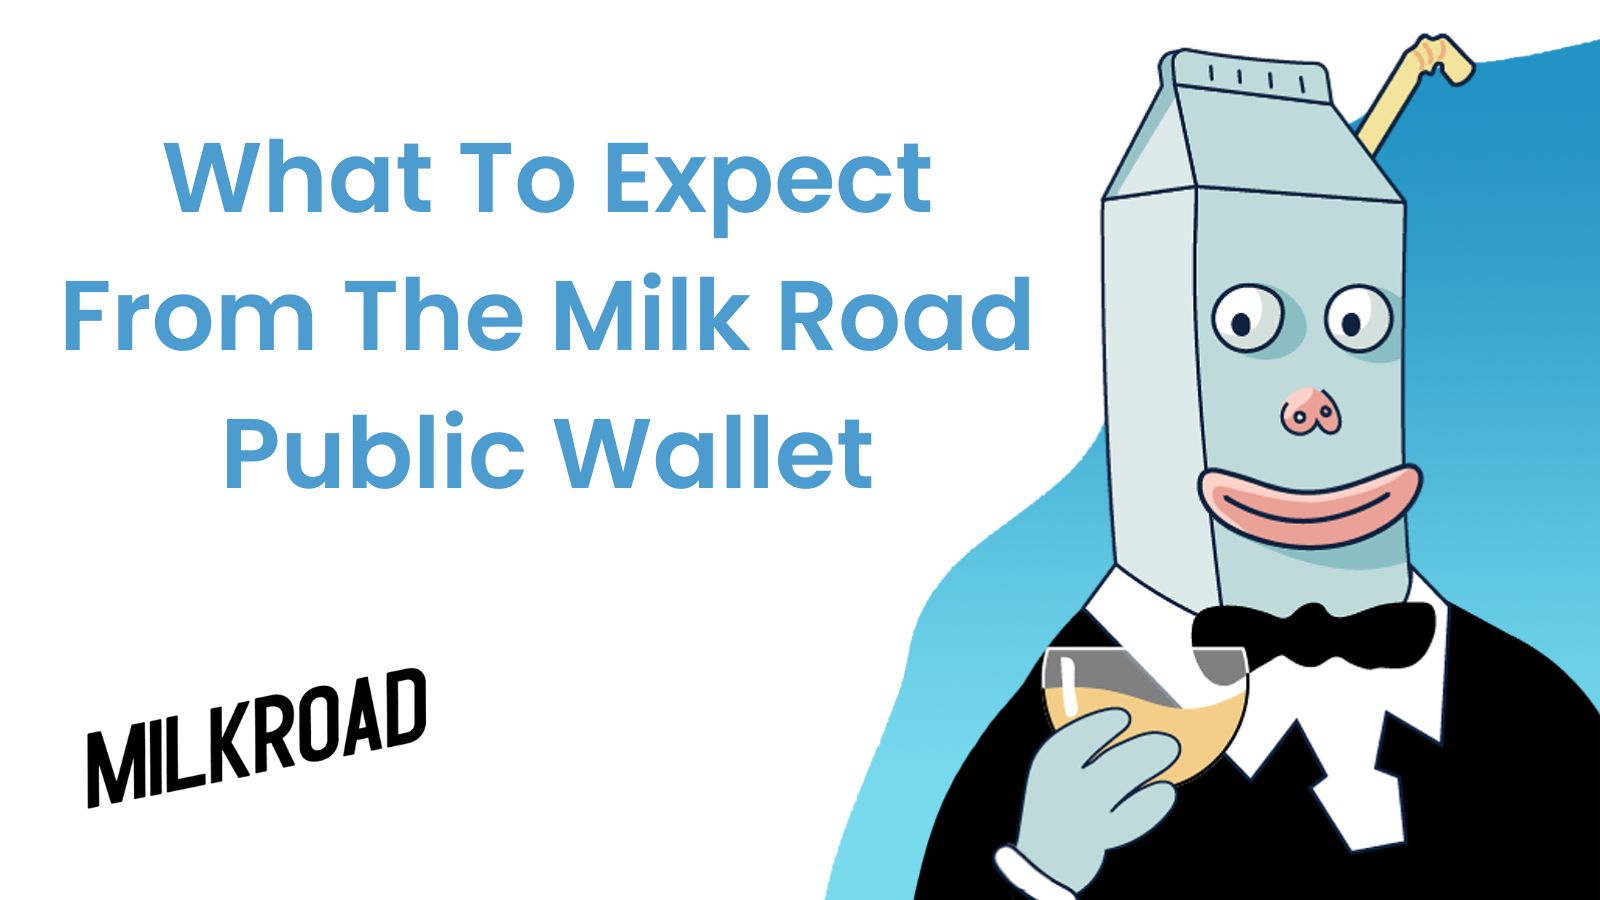 What To Expect From The Milk Road Public Wallet